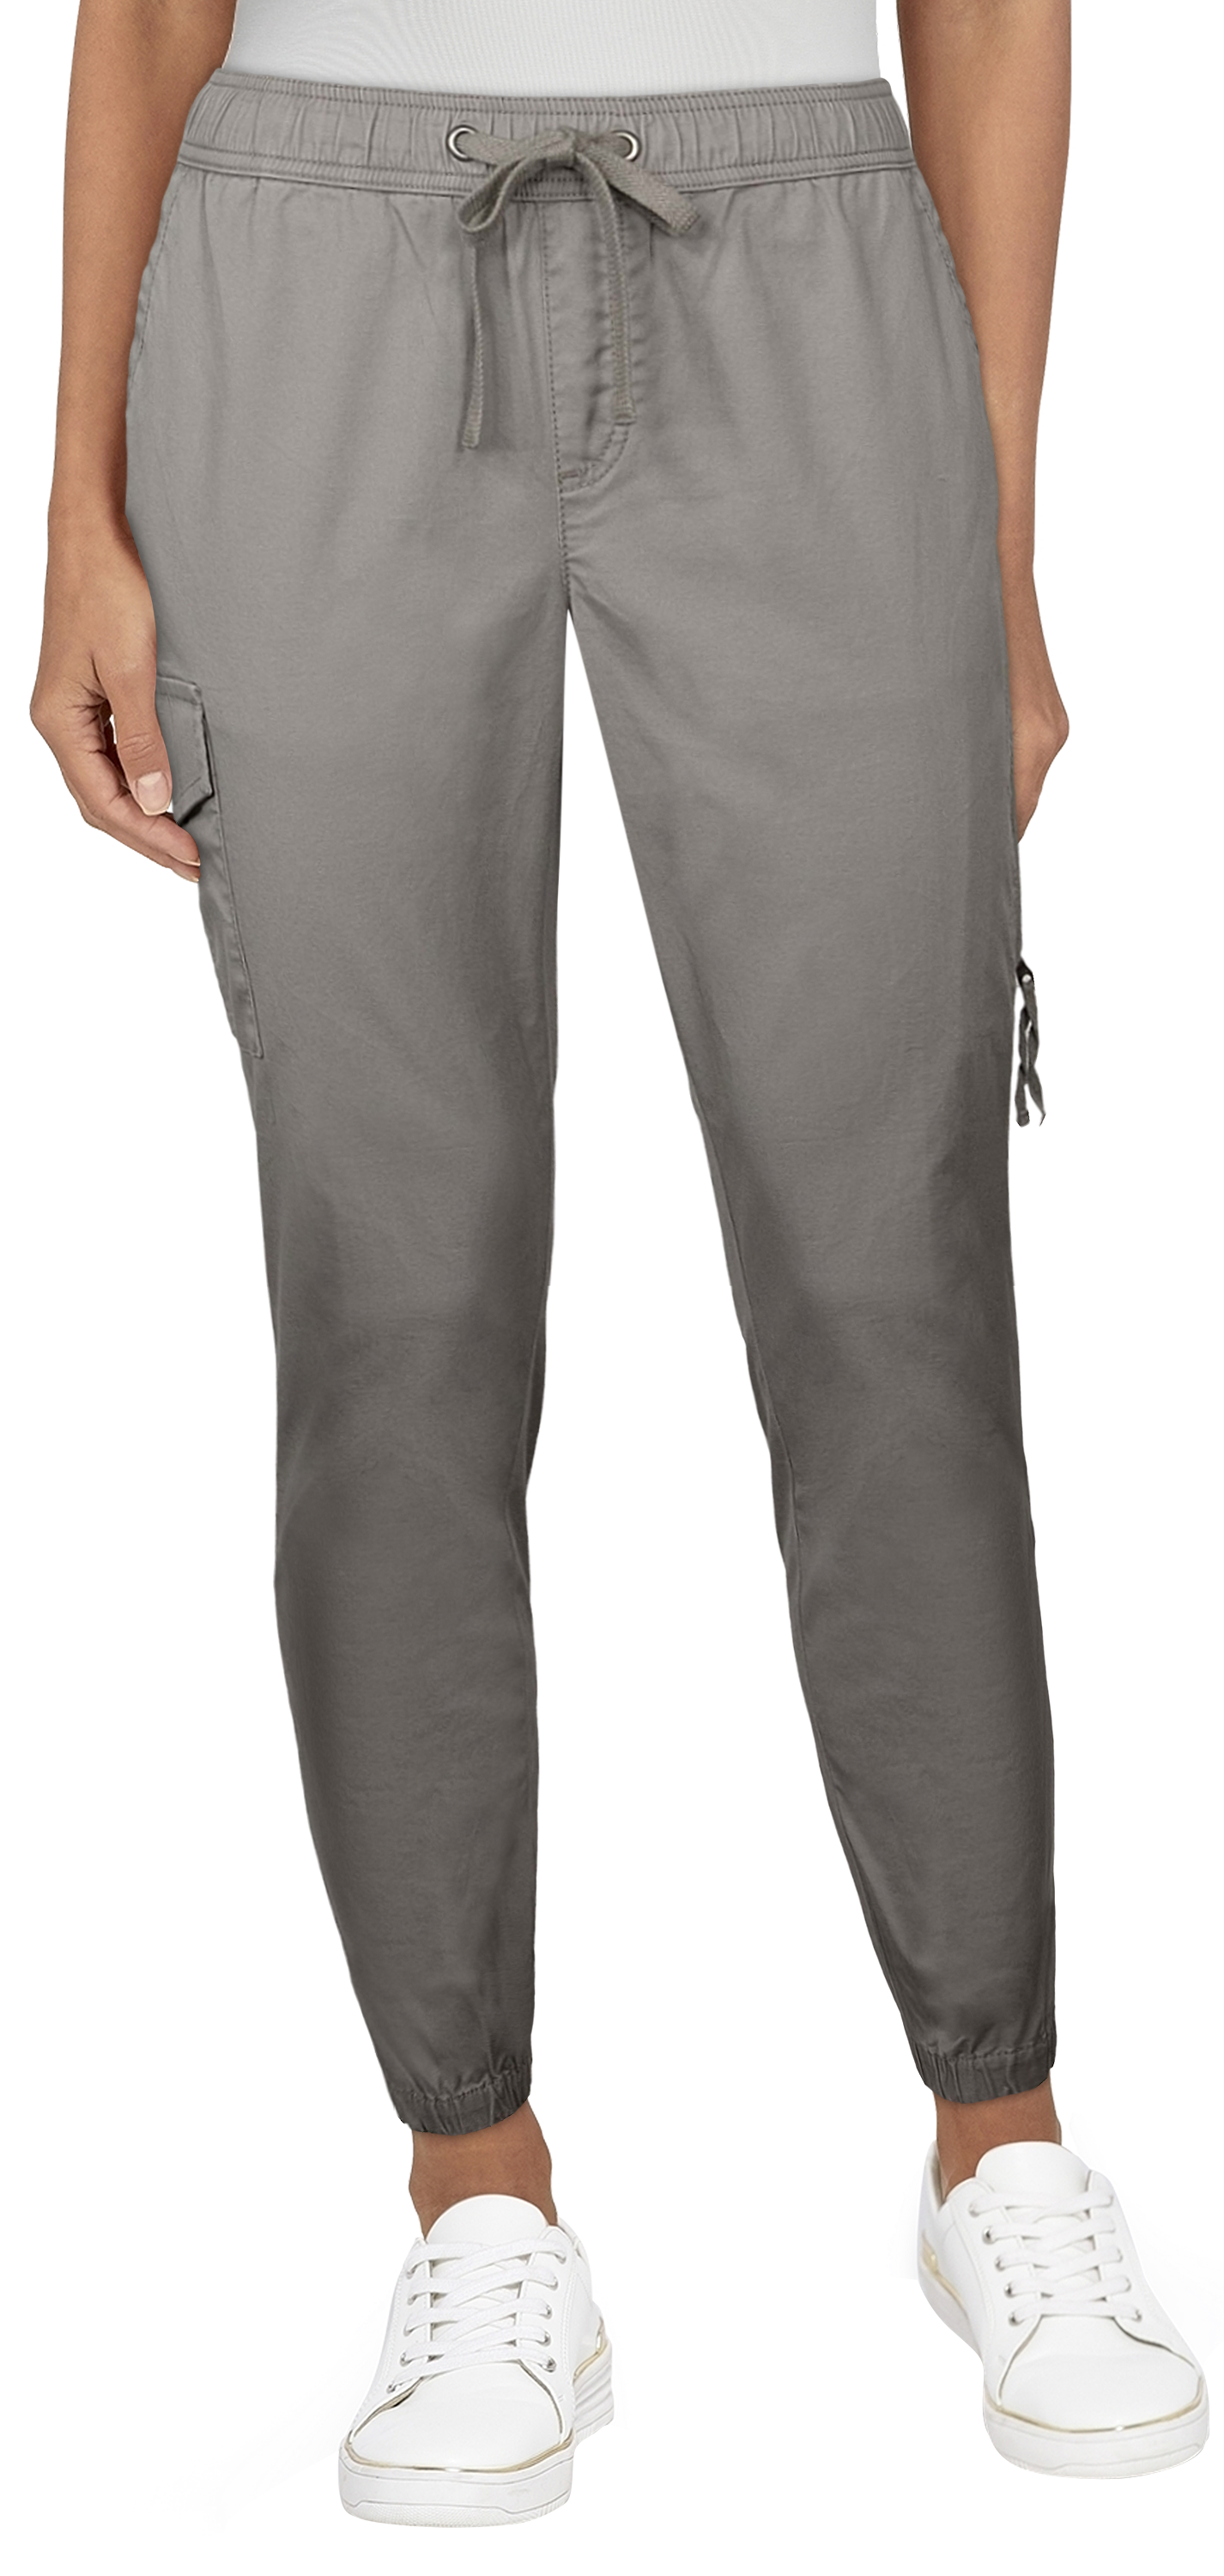 Natural Reflections Bella Vista Stretch Twill Jogger Pants for Ladies ...